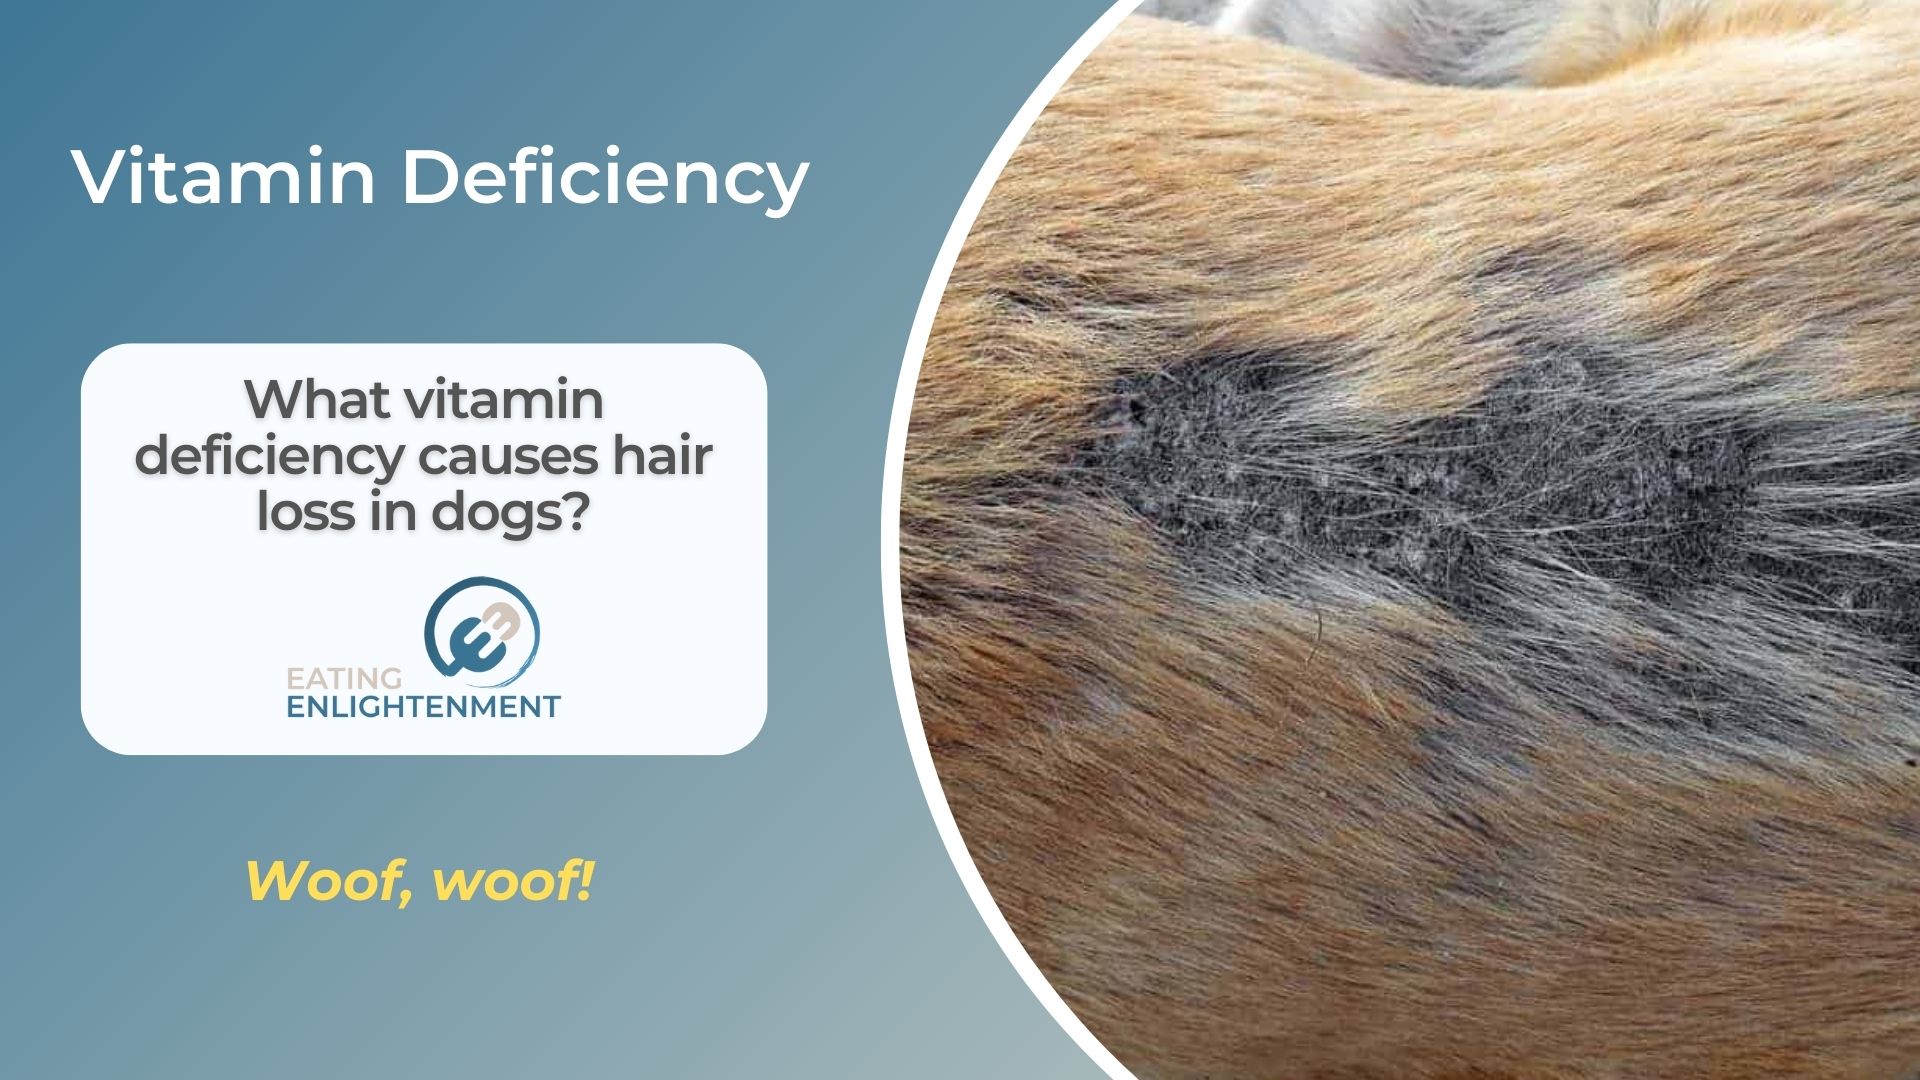 What vitamin deficiency causes hair loss in dogs? — Eating Enlightenment